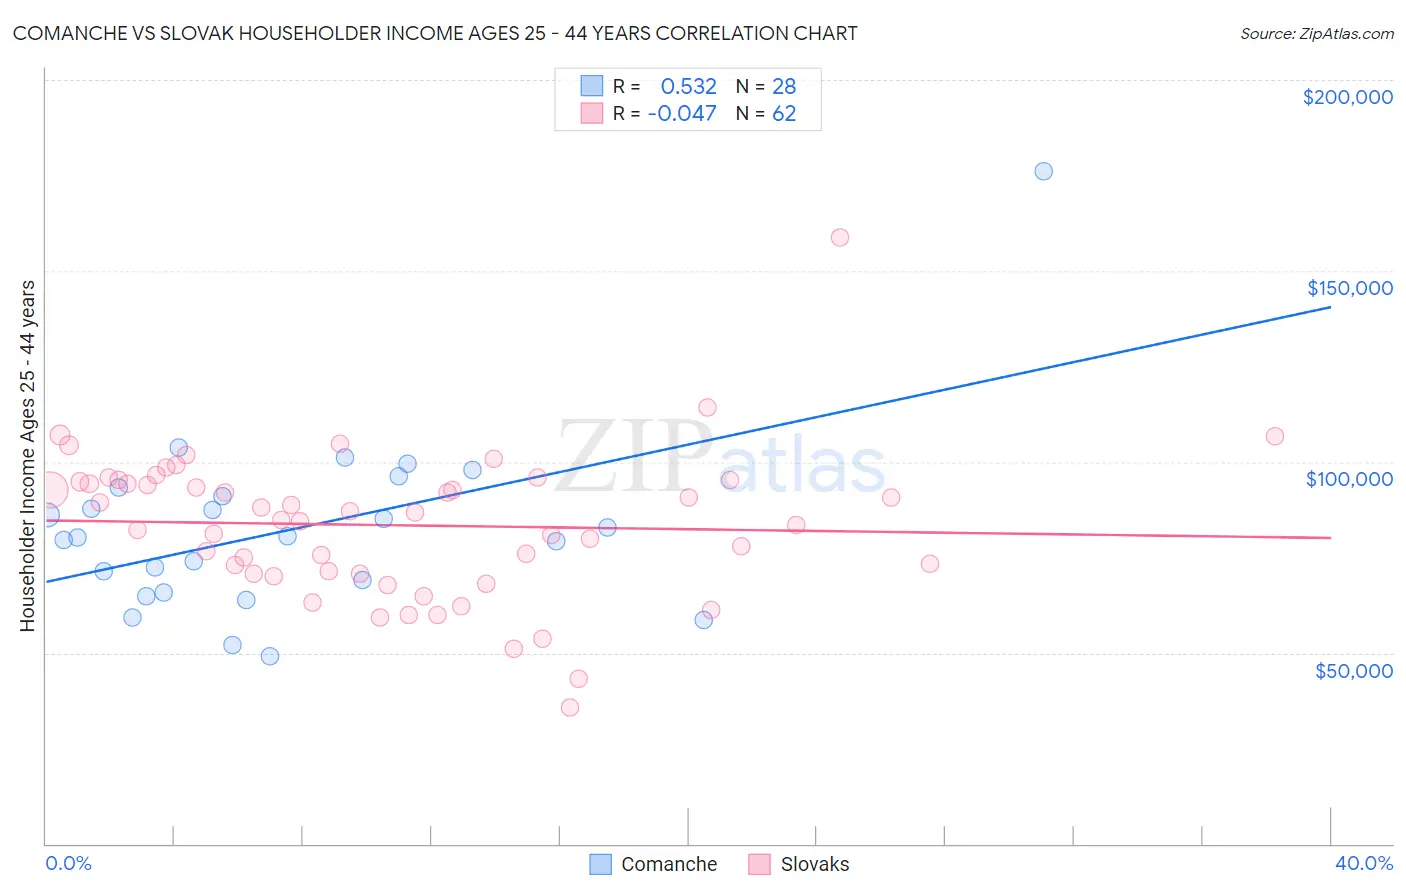 Comanche vs Slovak Householder Income Ages 25 - 44 years